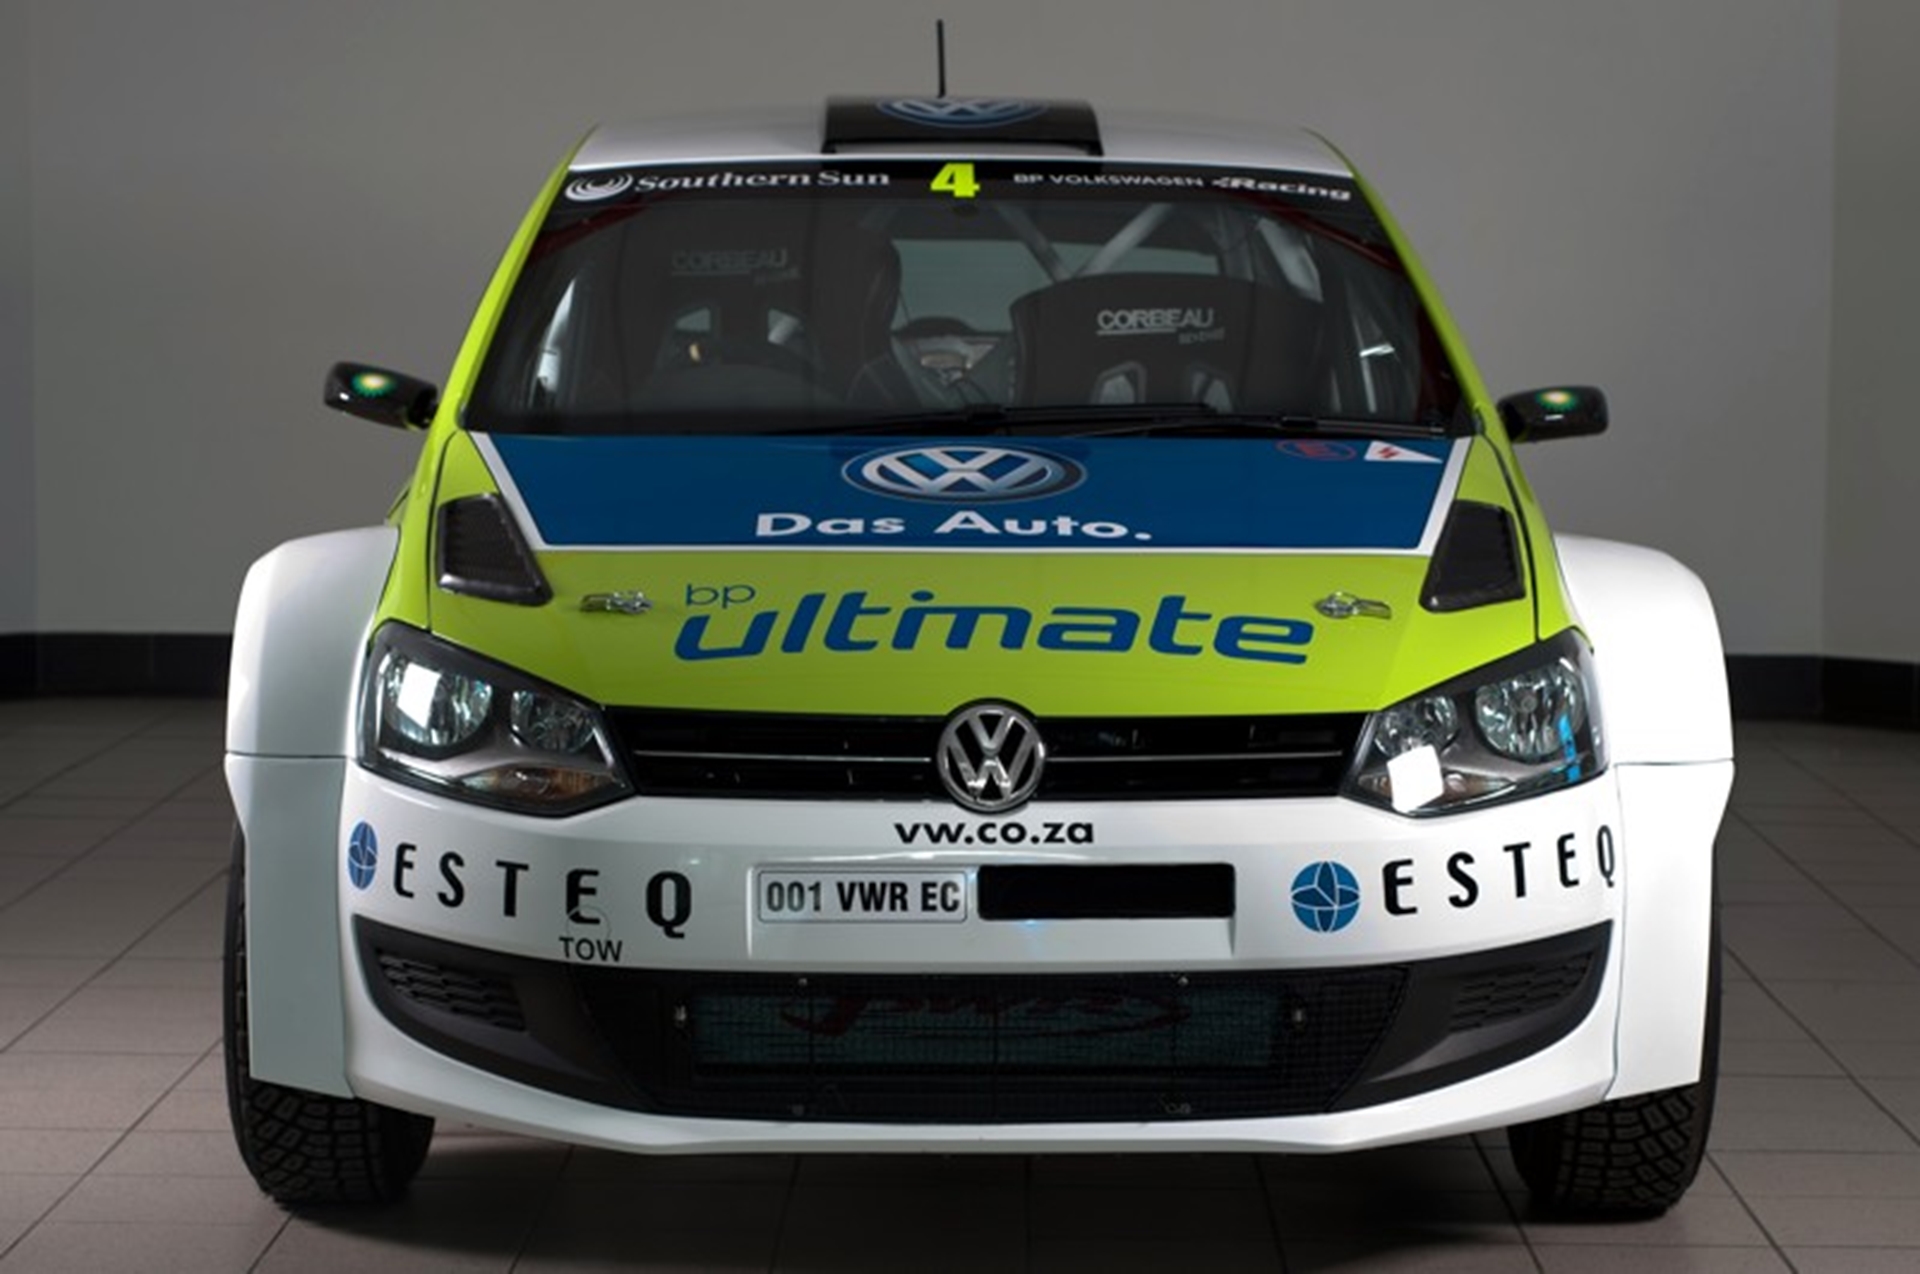 Volkswagen South Africa Motorsport driver line-up and competition classes